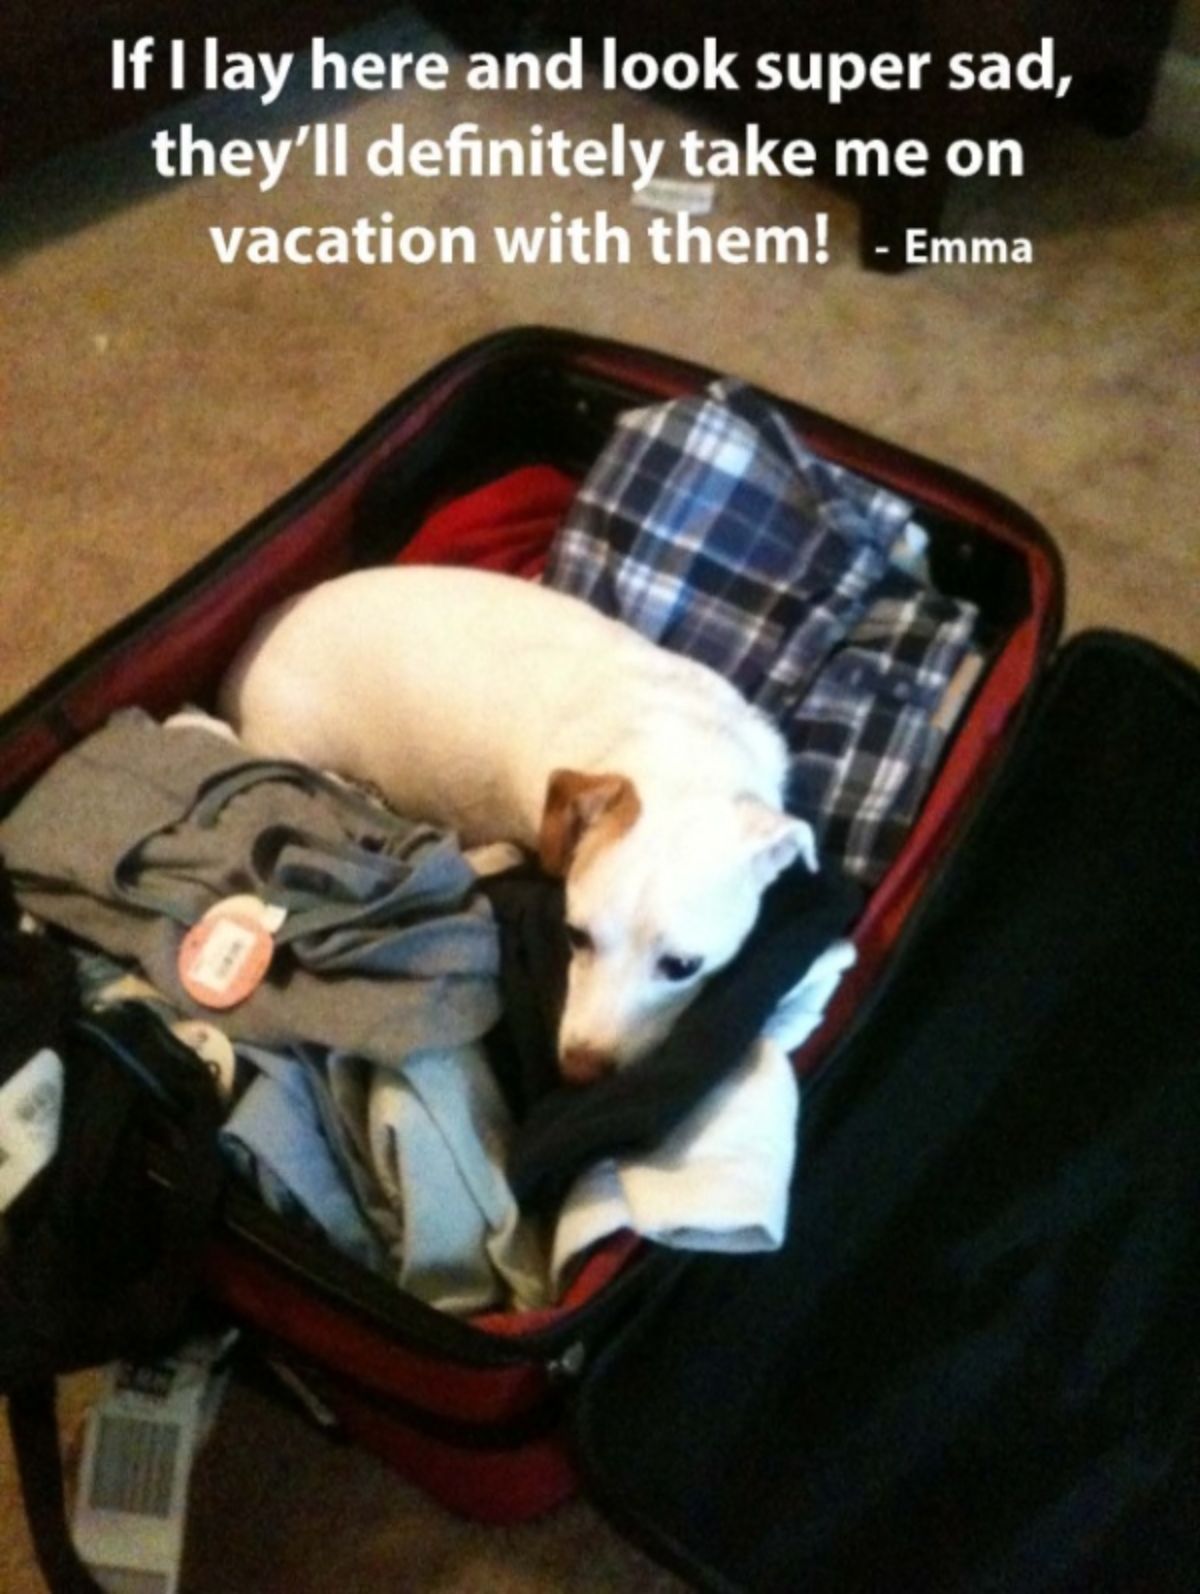 white dog laying on clothes in luggage with a caption saying that if she looks sad she'll get taken with the parents on vacation